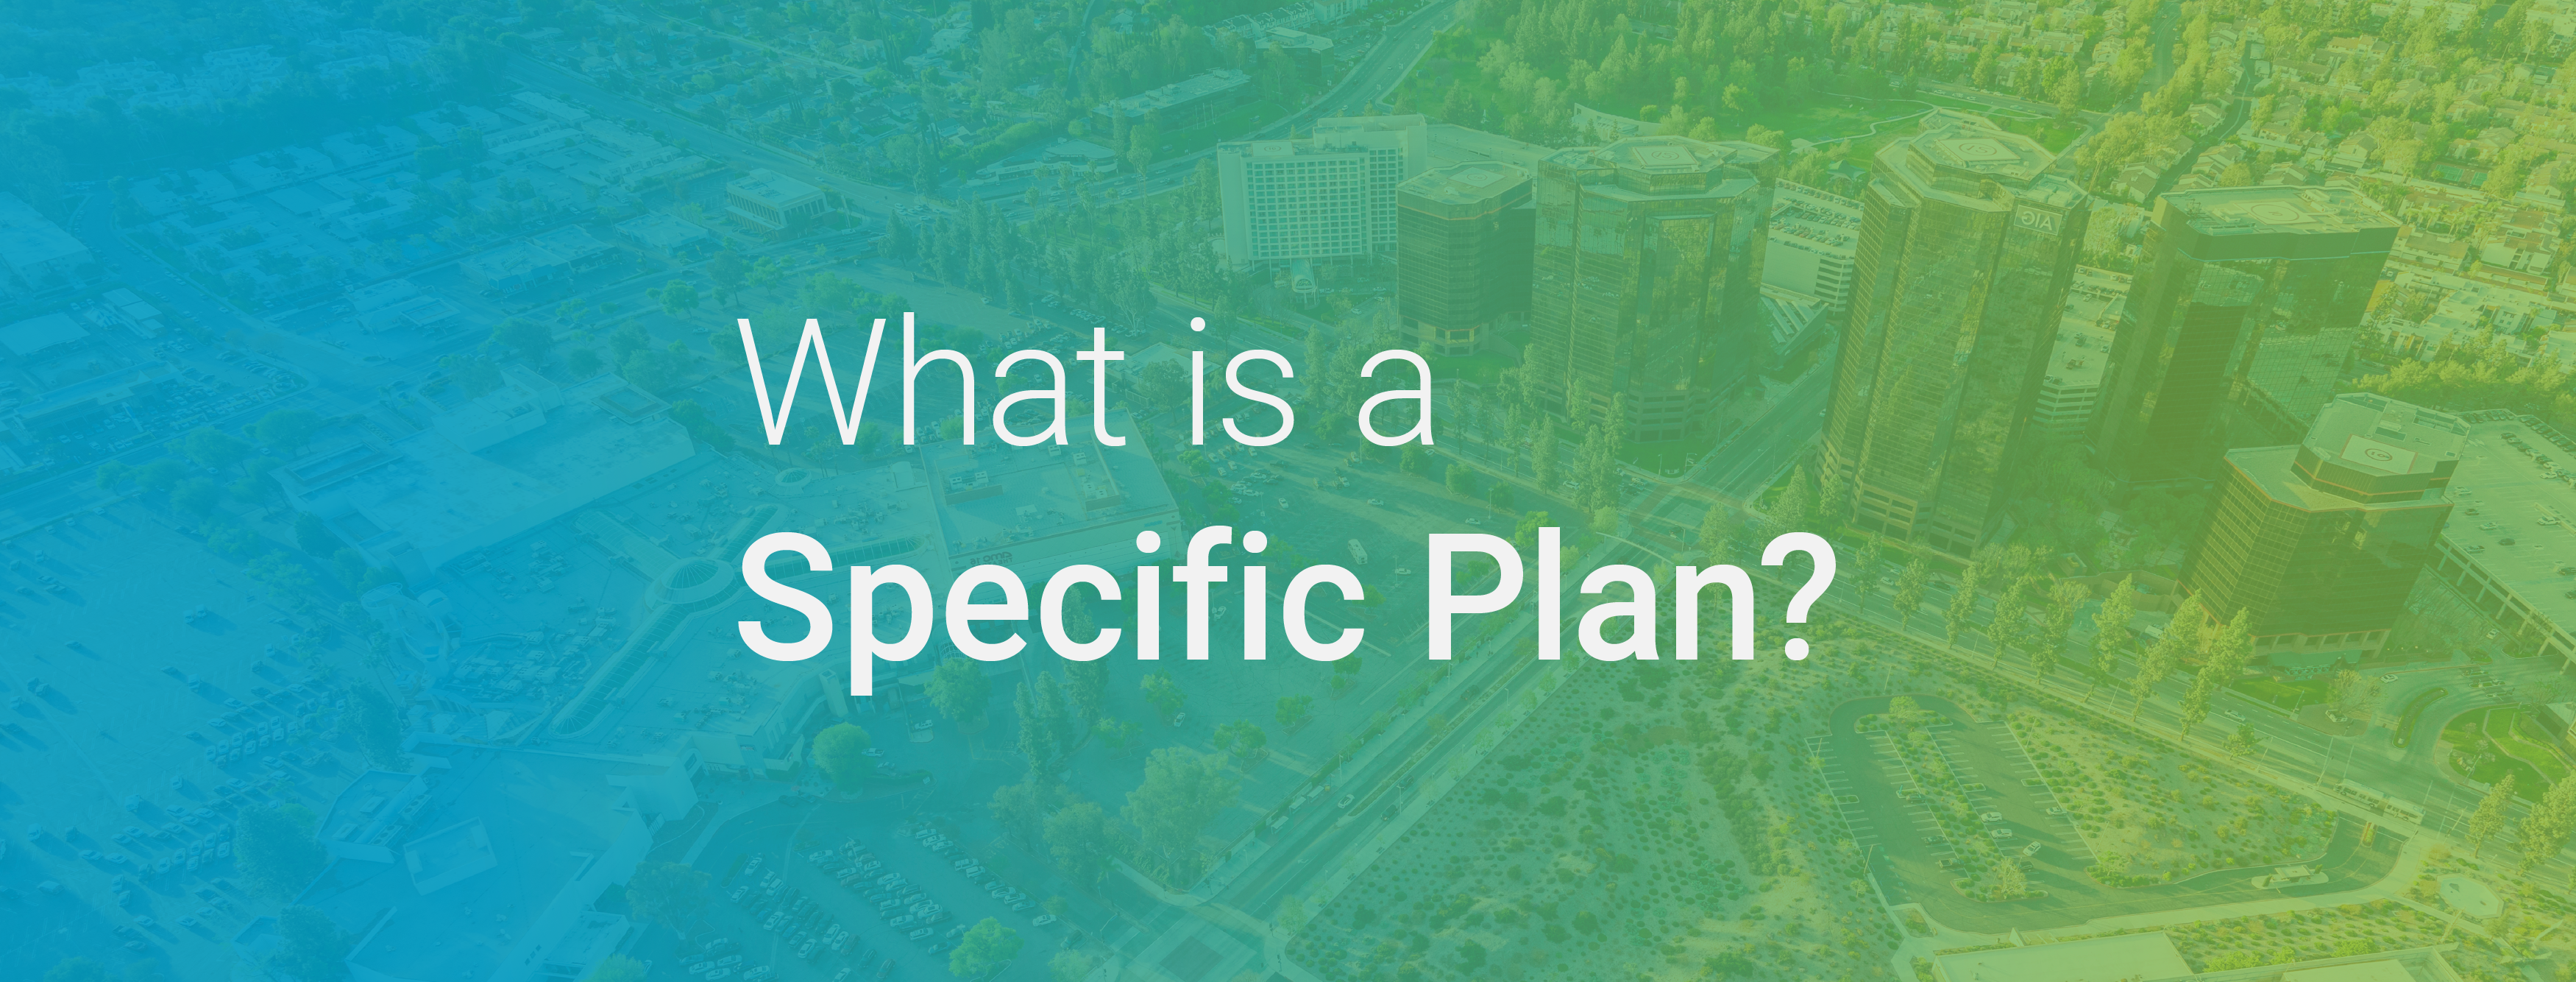 What is a Specific Plan?